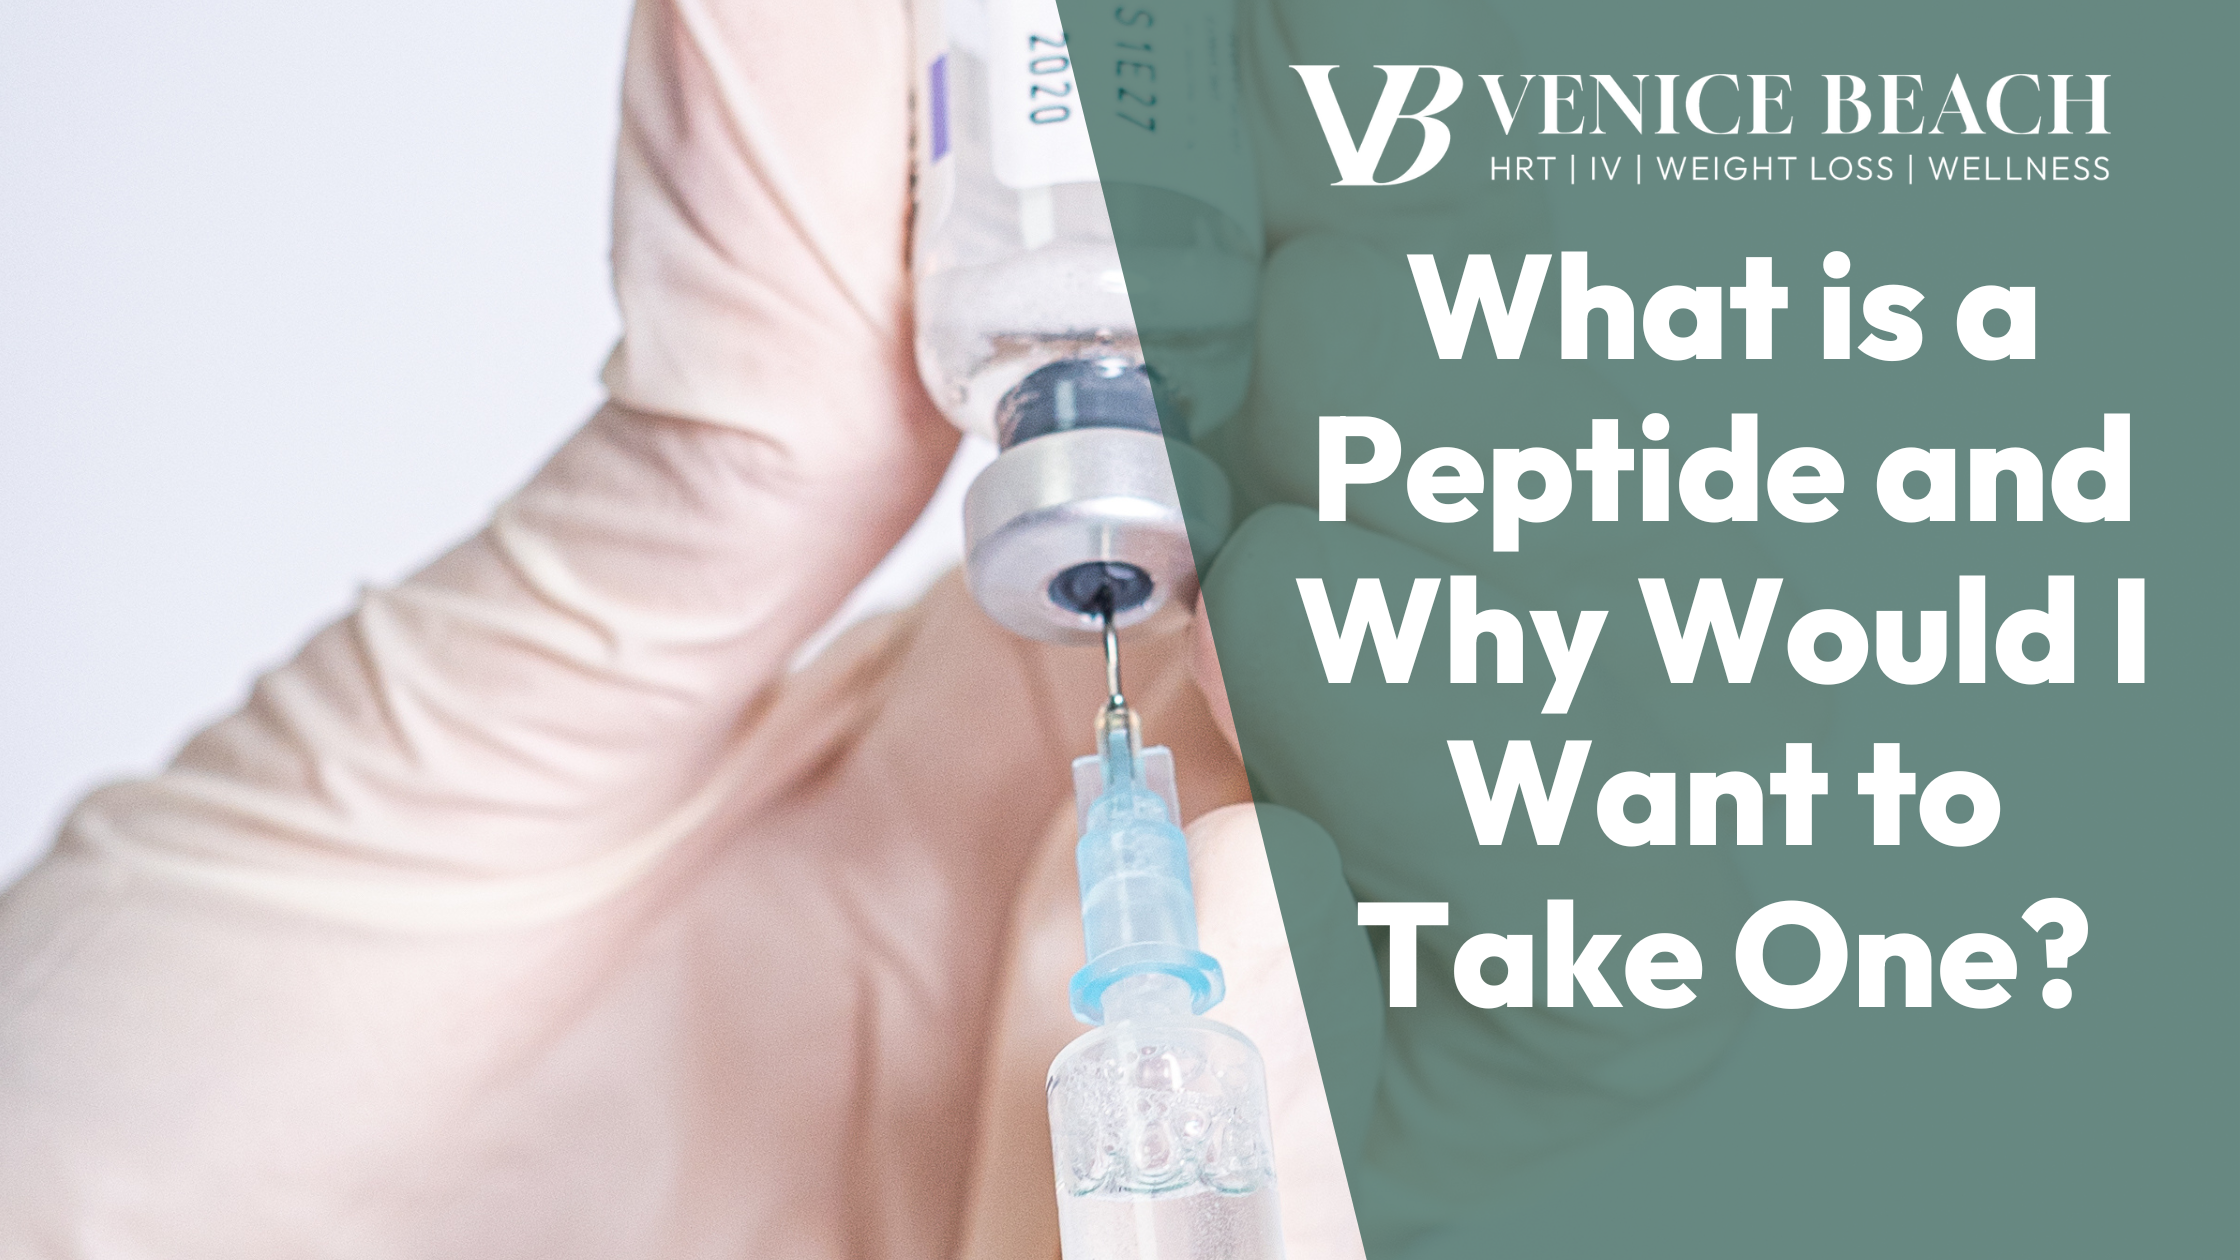 Venice Beach HRT– What is a Peptide and Why Would I Want to Take One